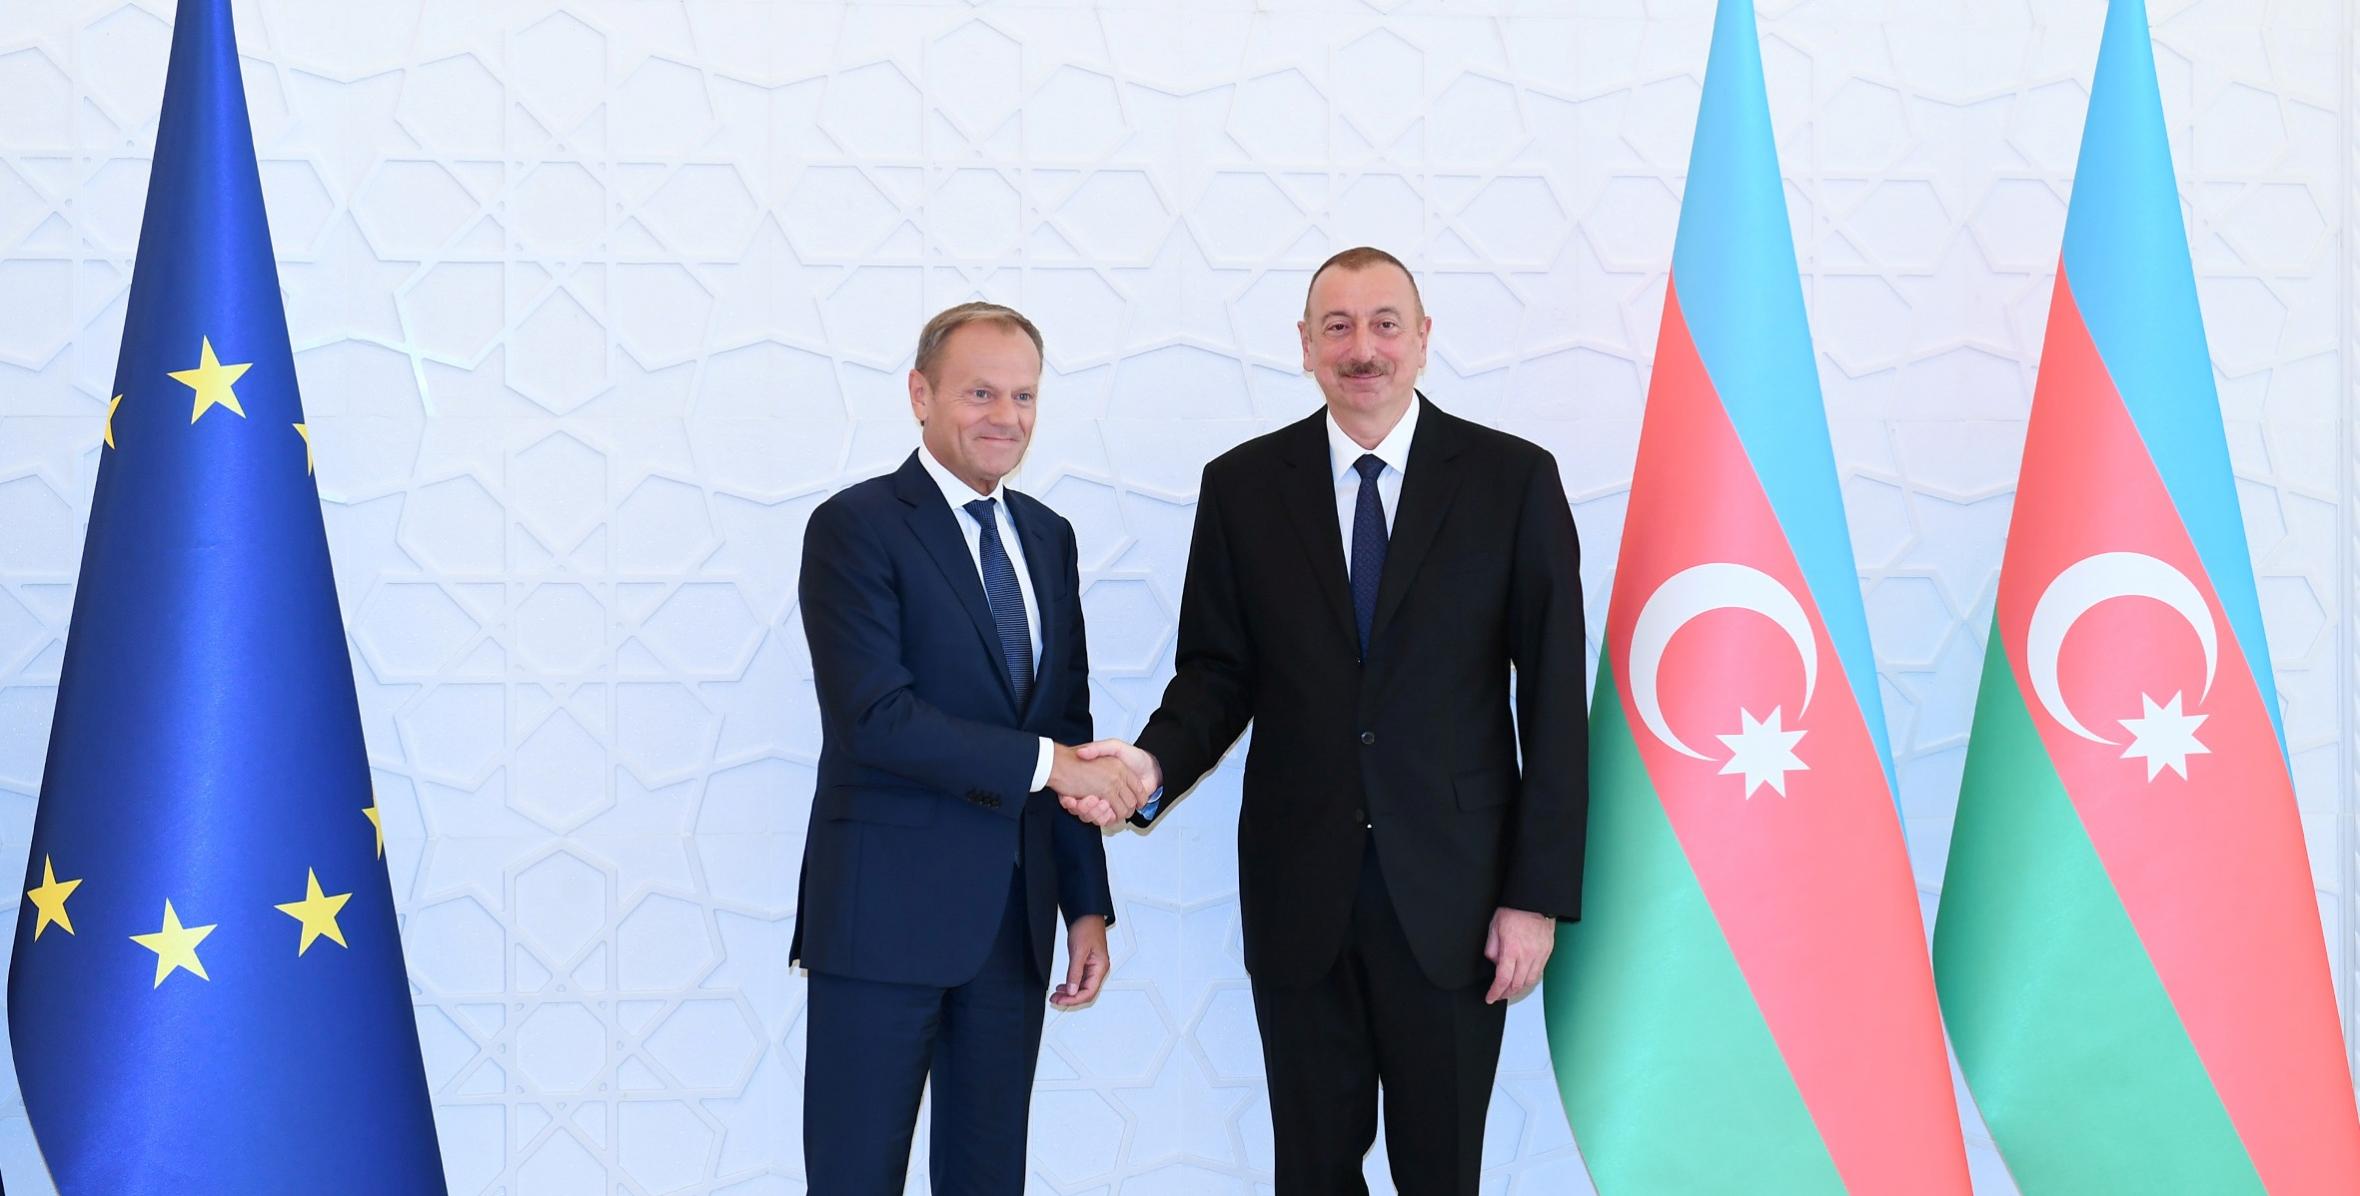 lham Aliyev, President of European Council Donald Tusk held one-on-one meeting